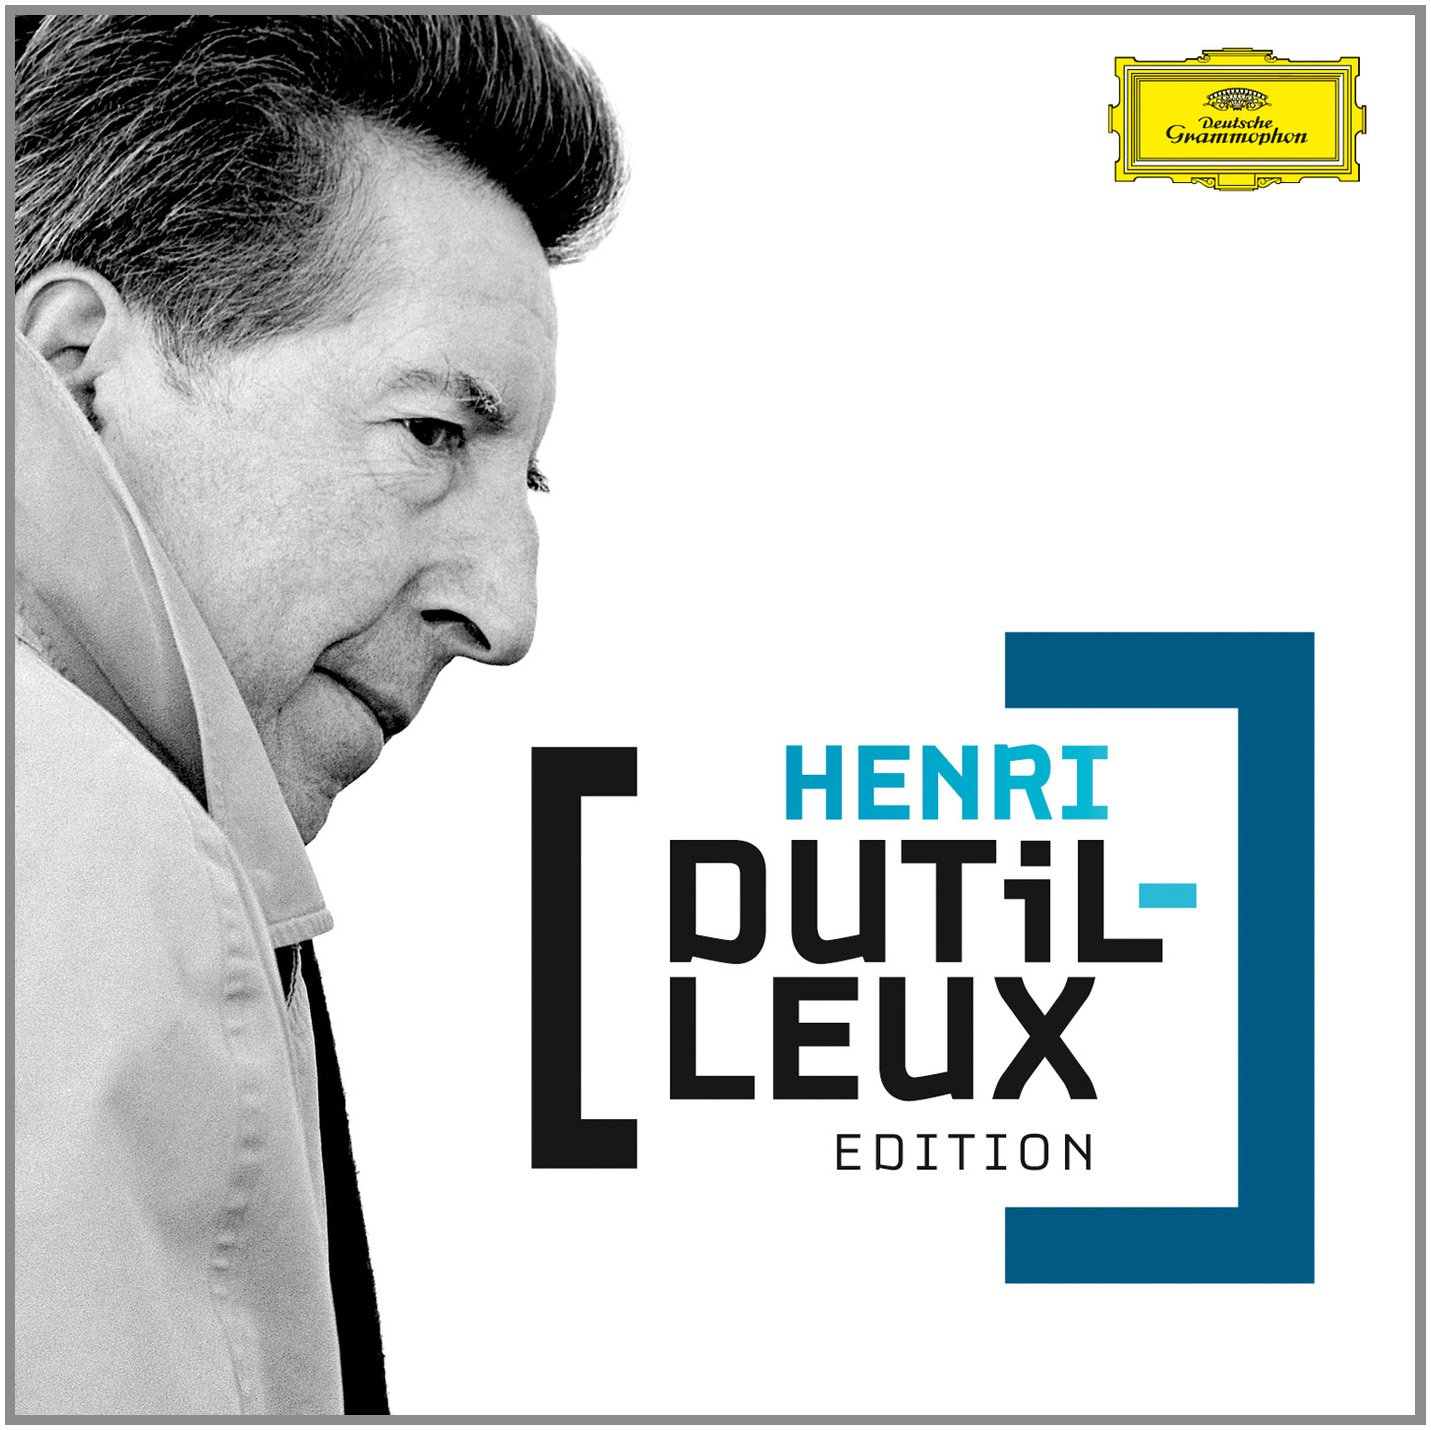 Dutilleux-Oeuvres orchestrales - Page 3 81V4oC9RskL._SL1431_